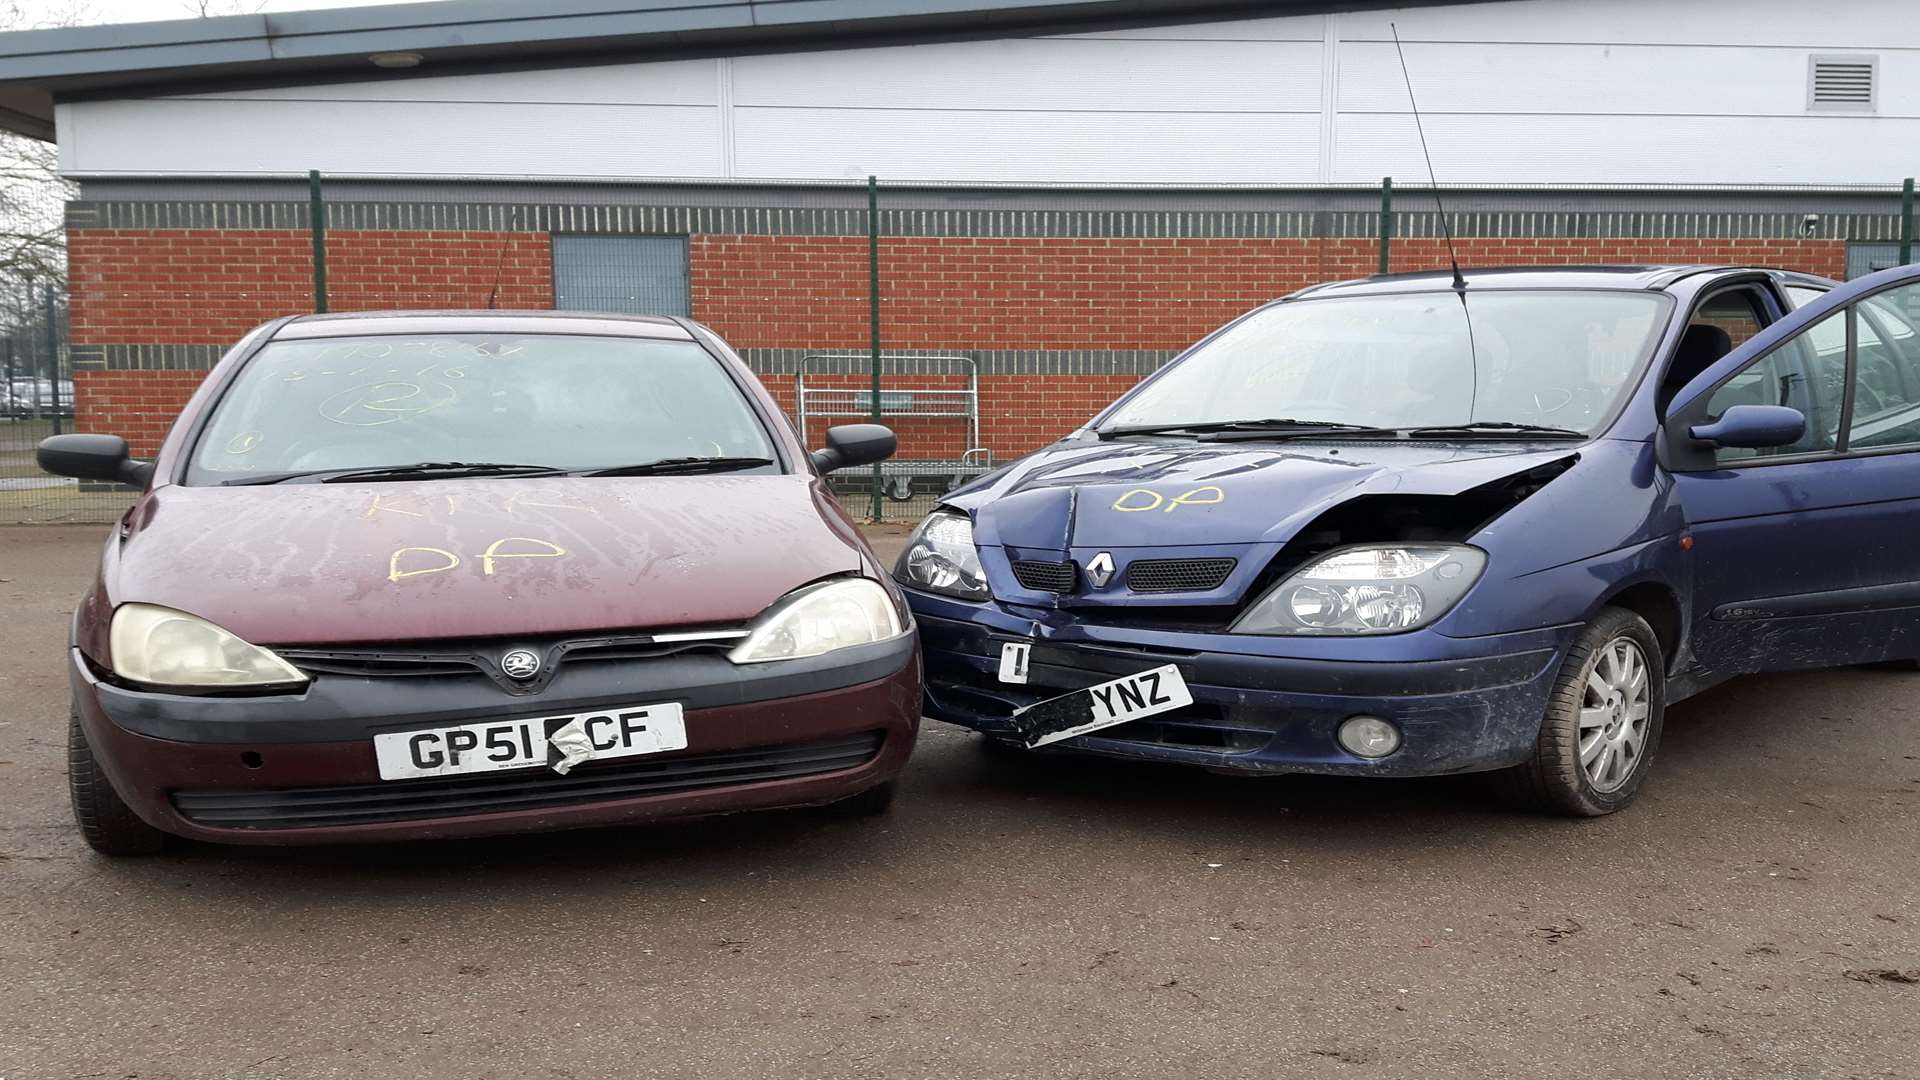 The cars which were smashed and used in the KFRS demonstration